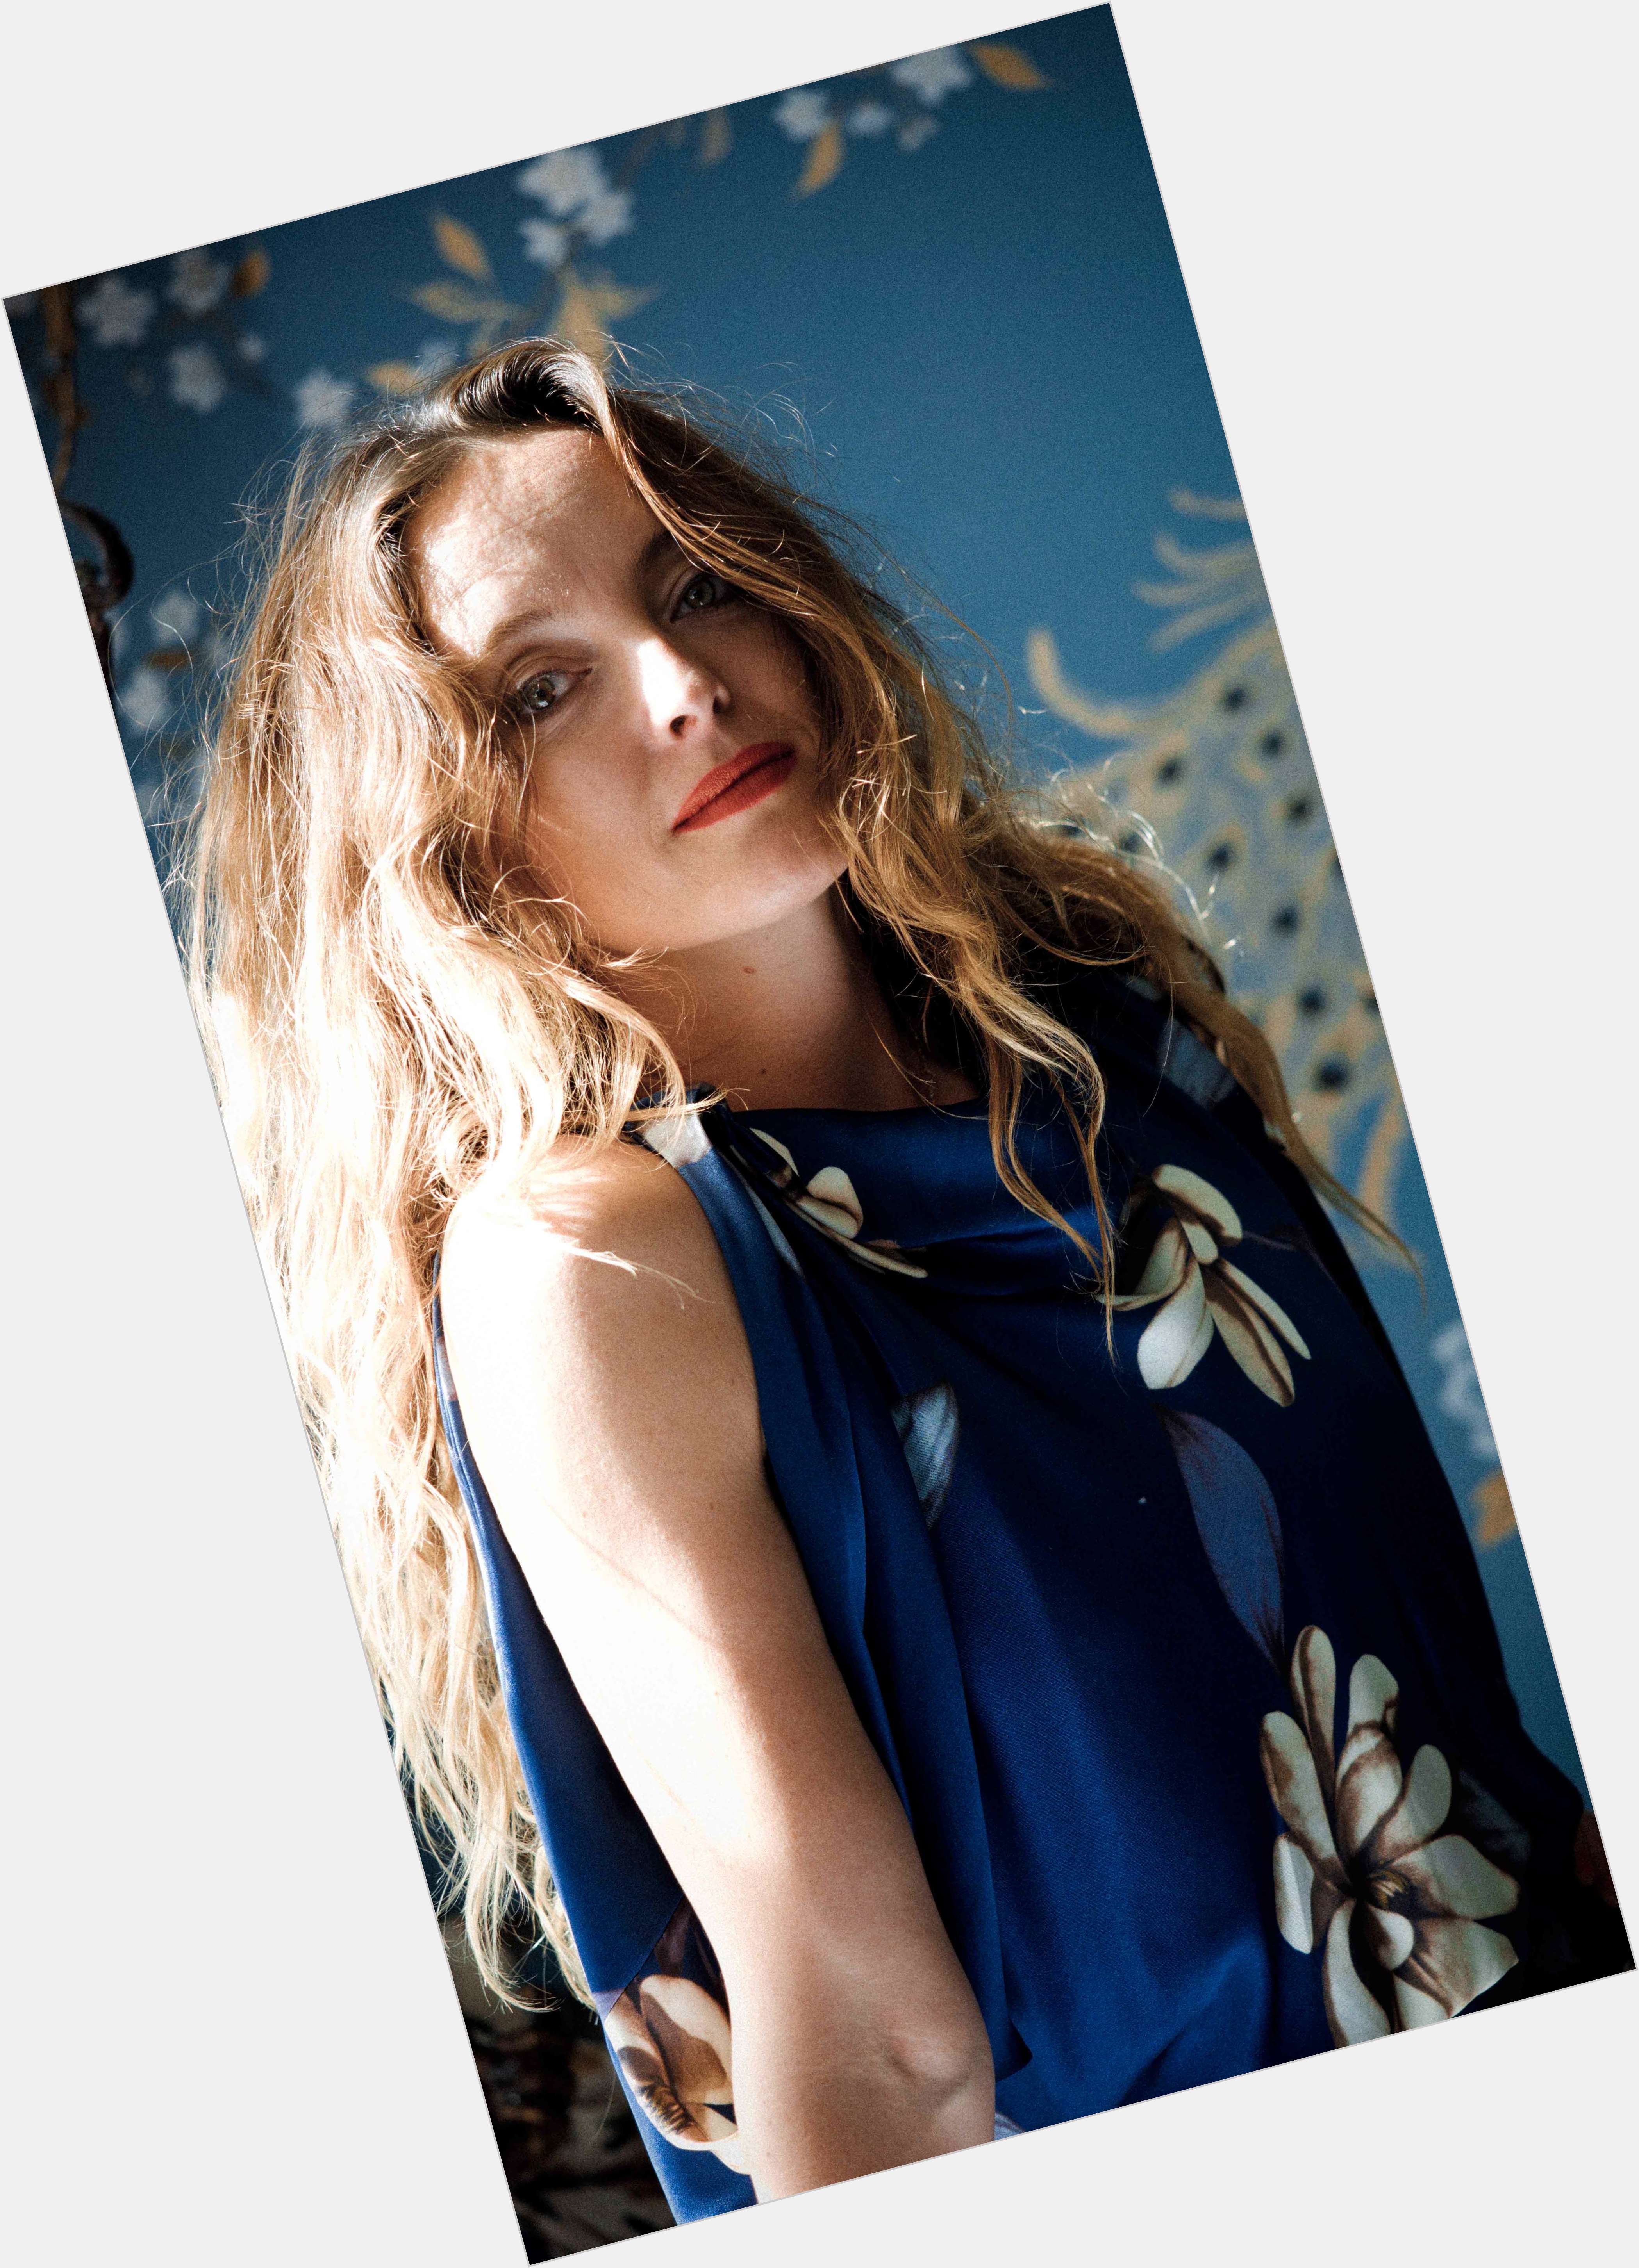 Https://fanpagepress.net/m/A/Alice Temperley New Pic 0